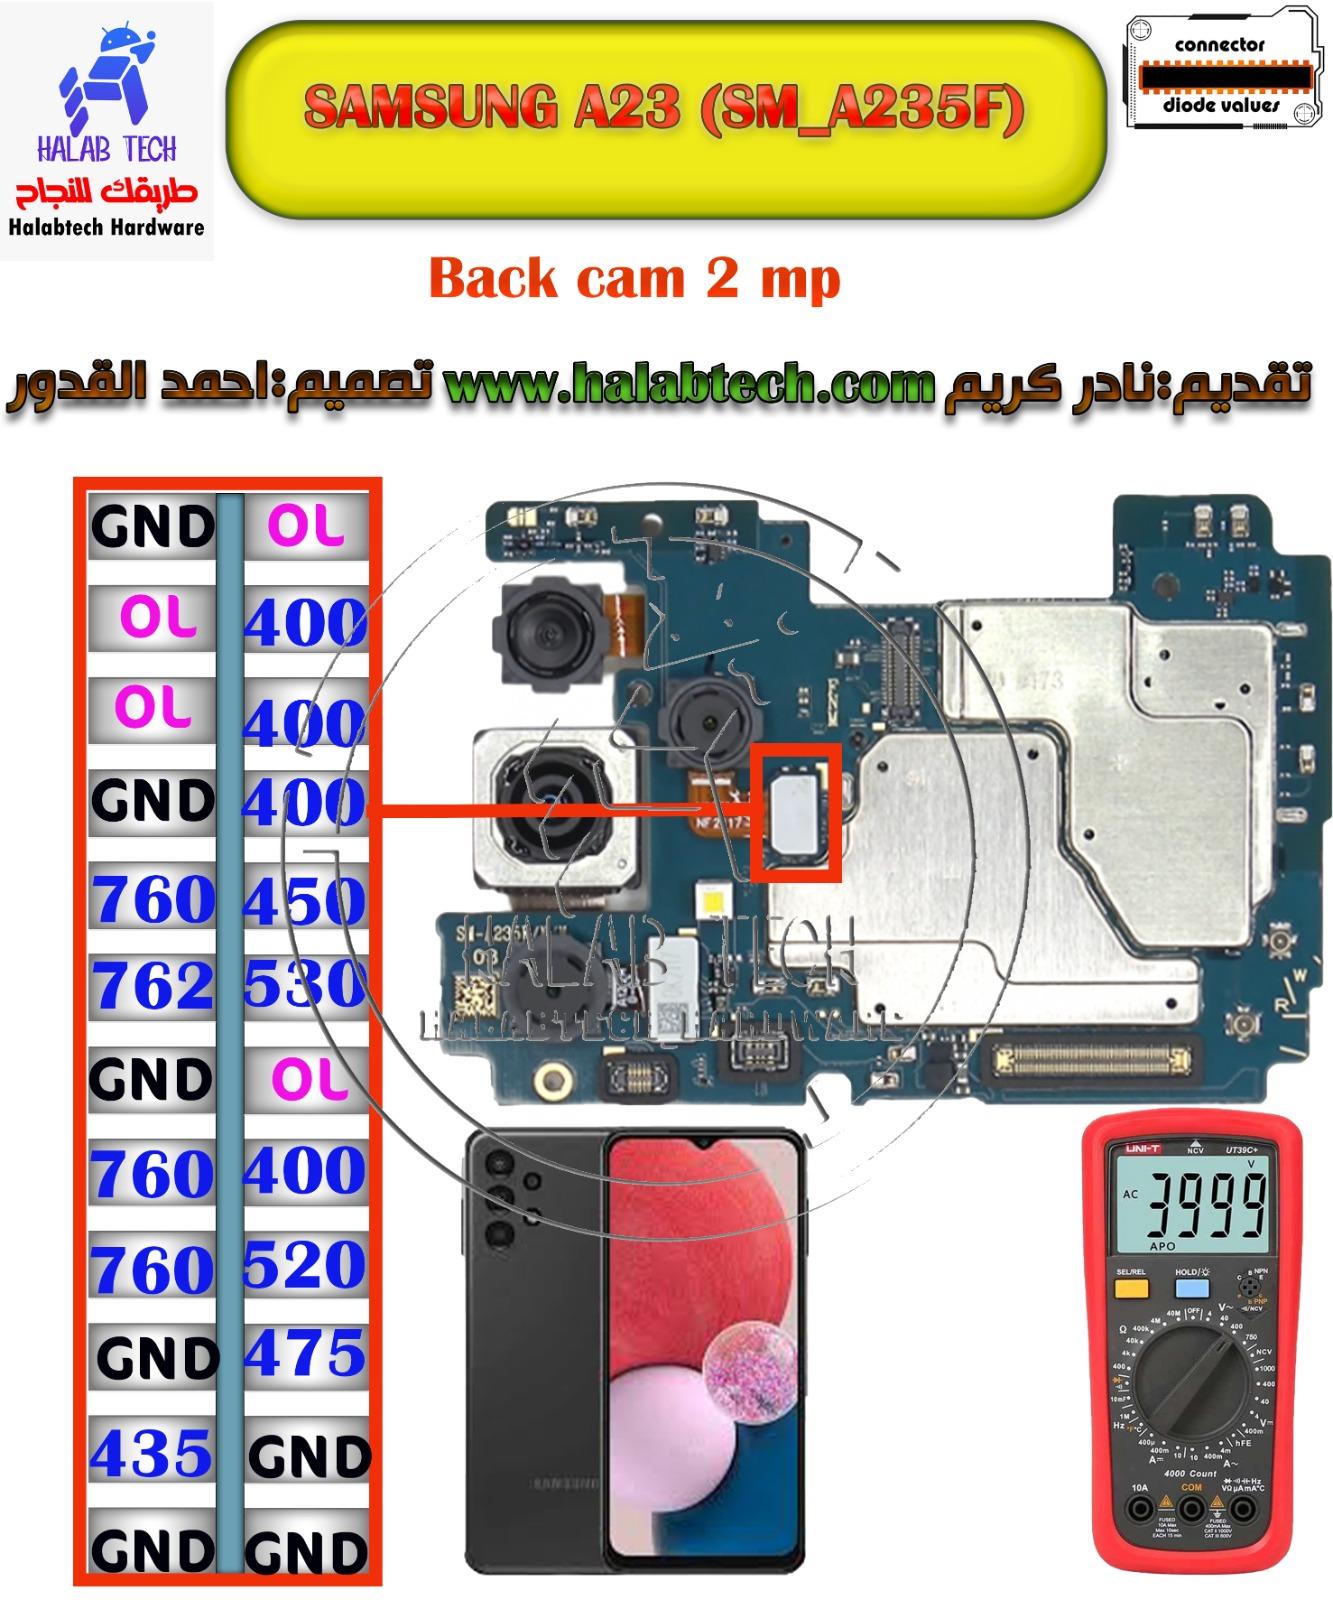 SamsungA23A235Fbackcam2mpconnectordiodevalues.png.400ae91718a7f385cd7a457306bbbd7d.png